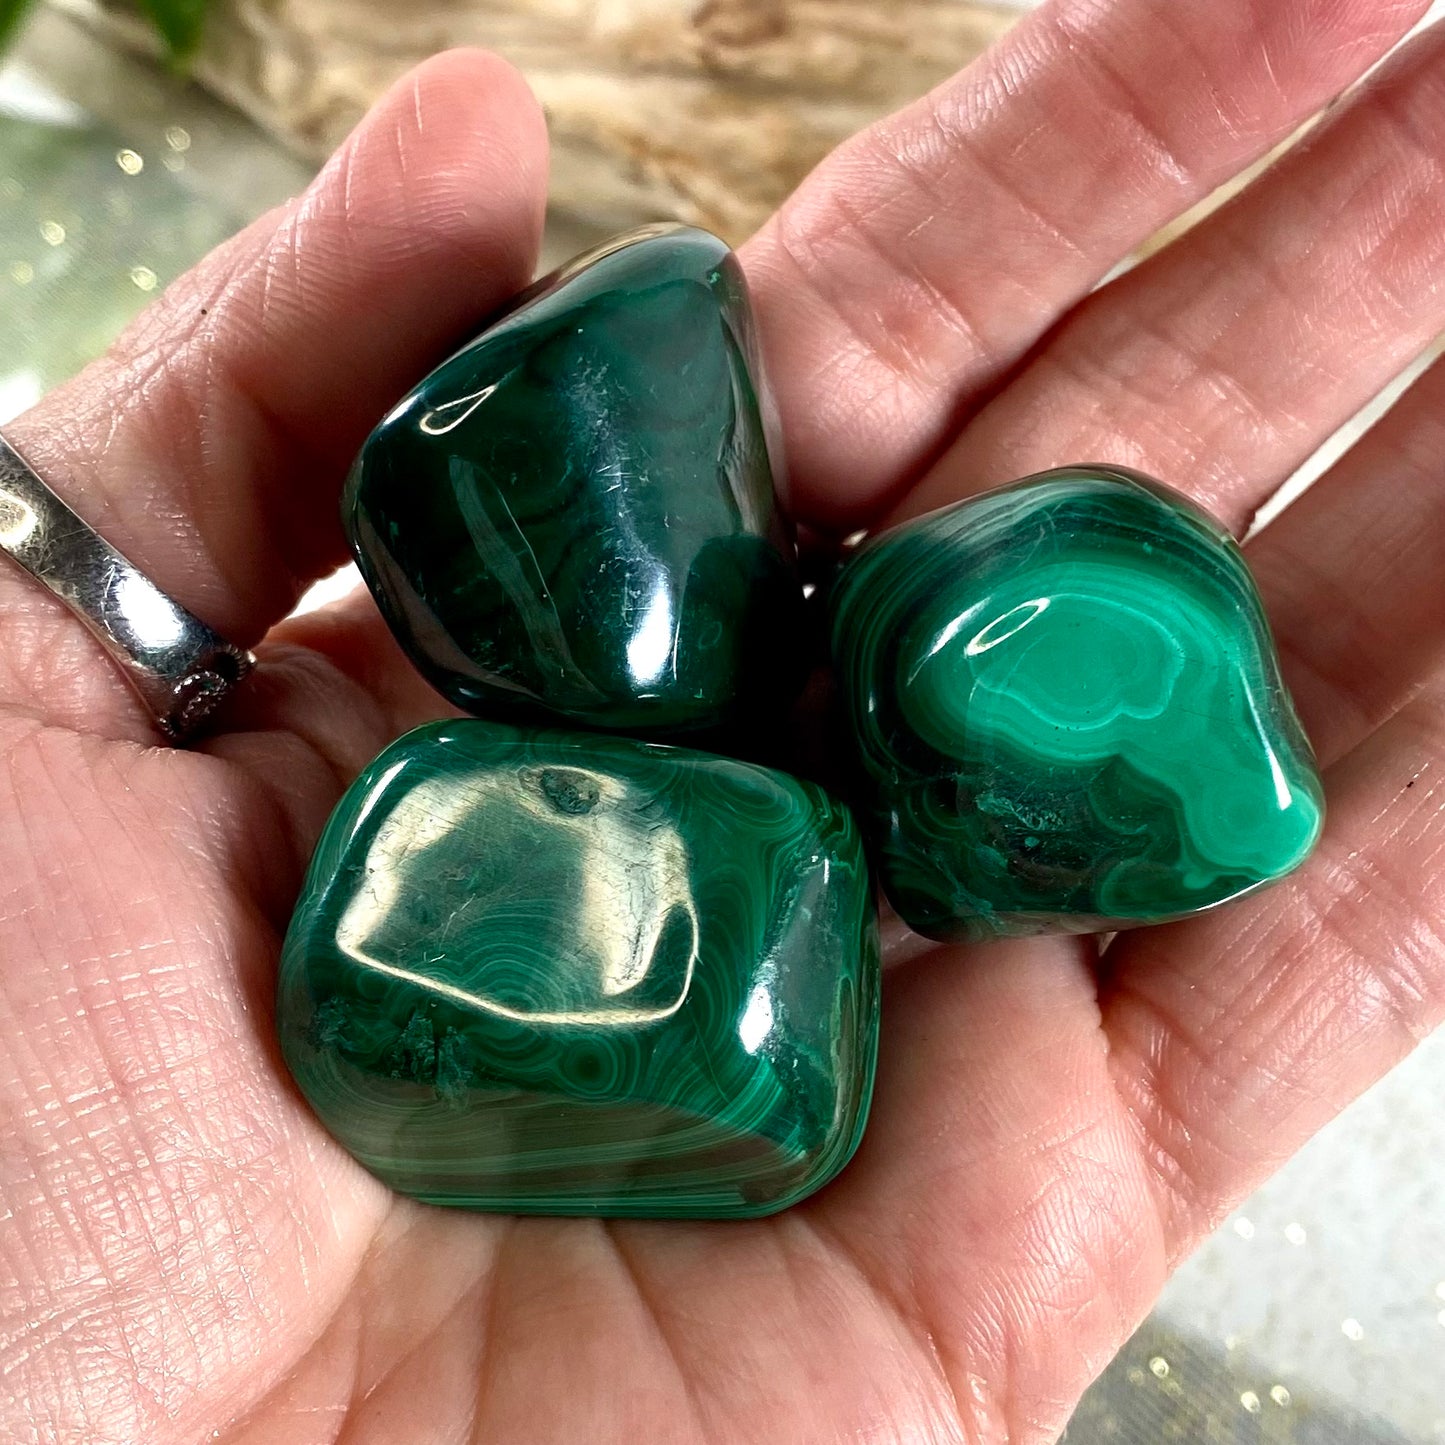 Malachite Tumbled Crystals: Transformative Vibrance from Earth's Depths